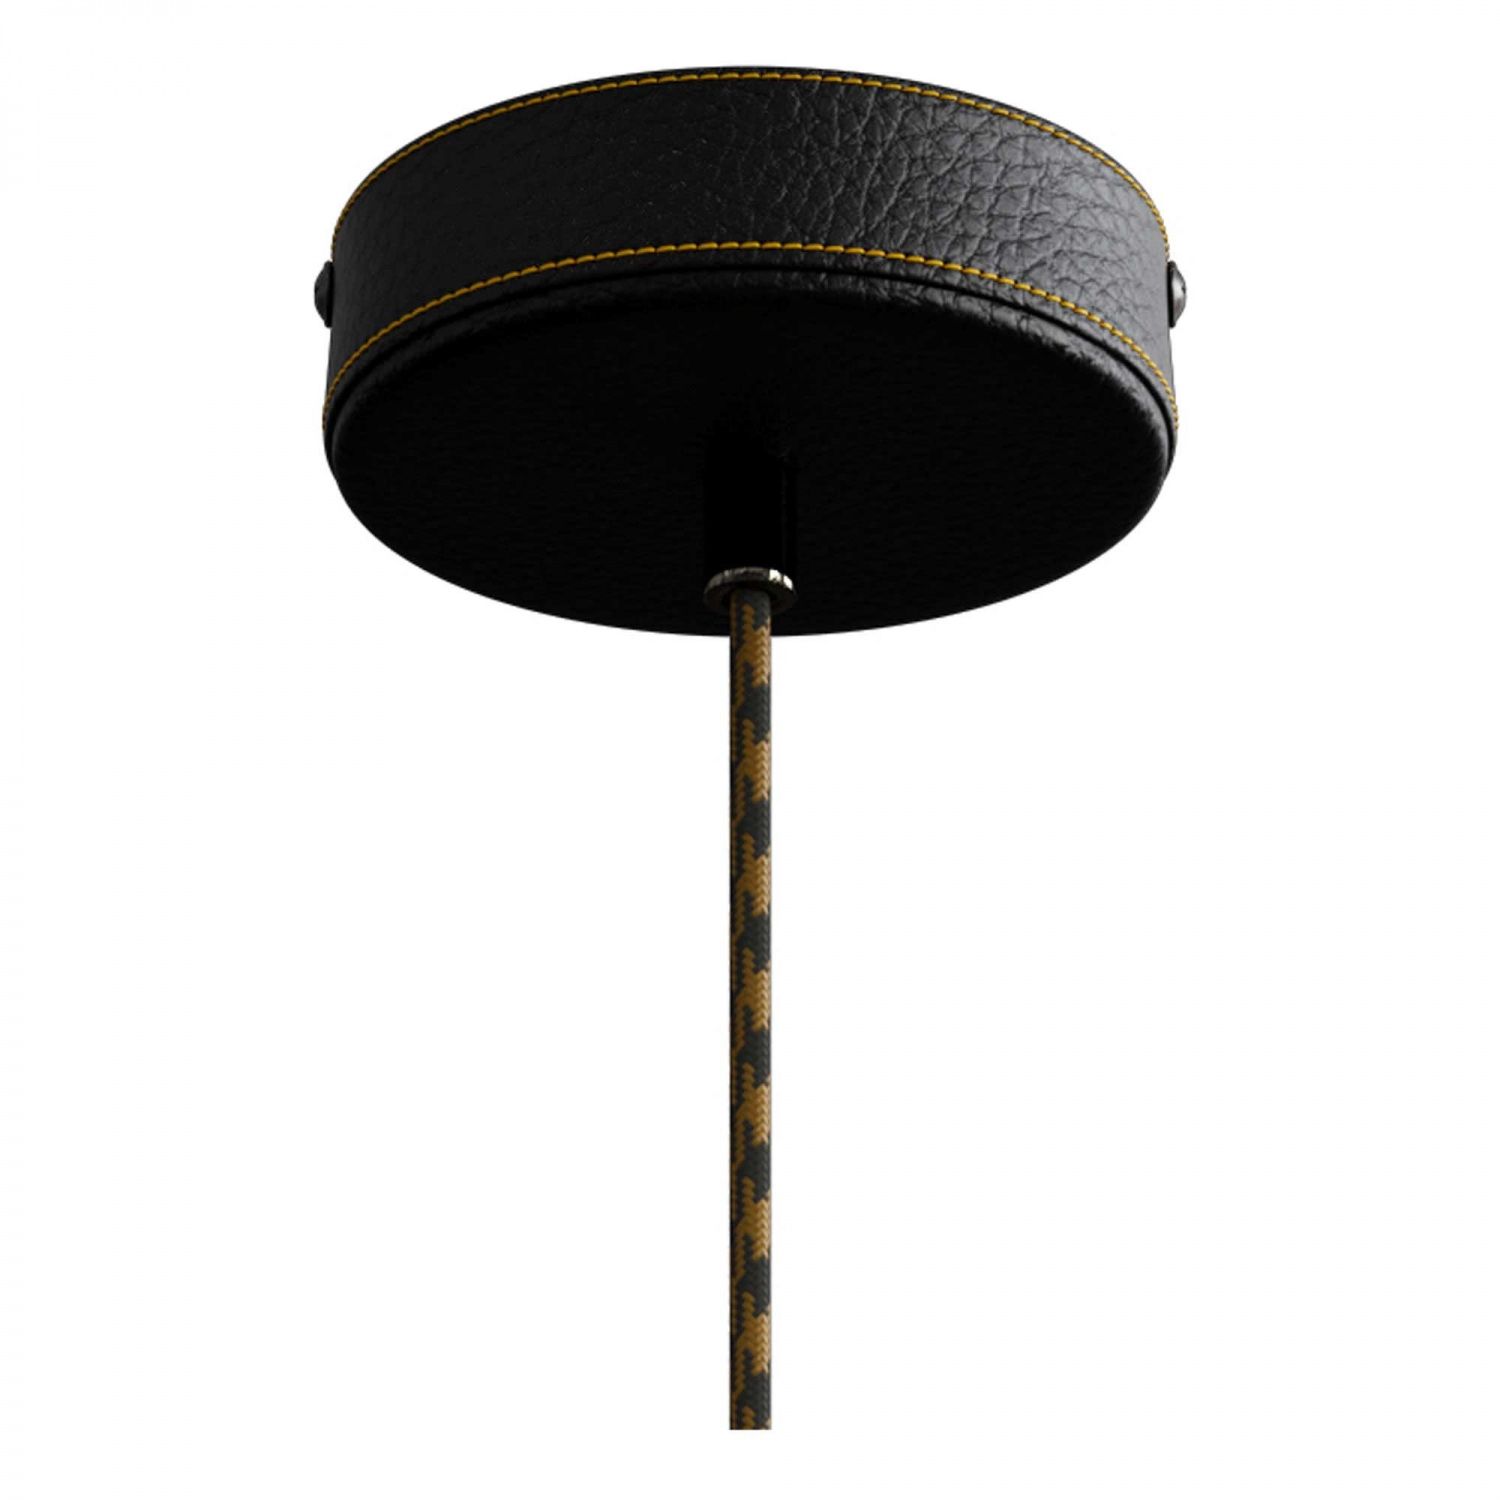 Pendant lamp with textile cable and leather details